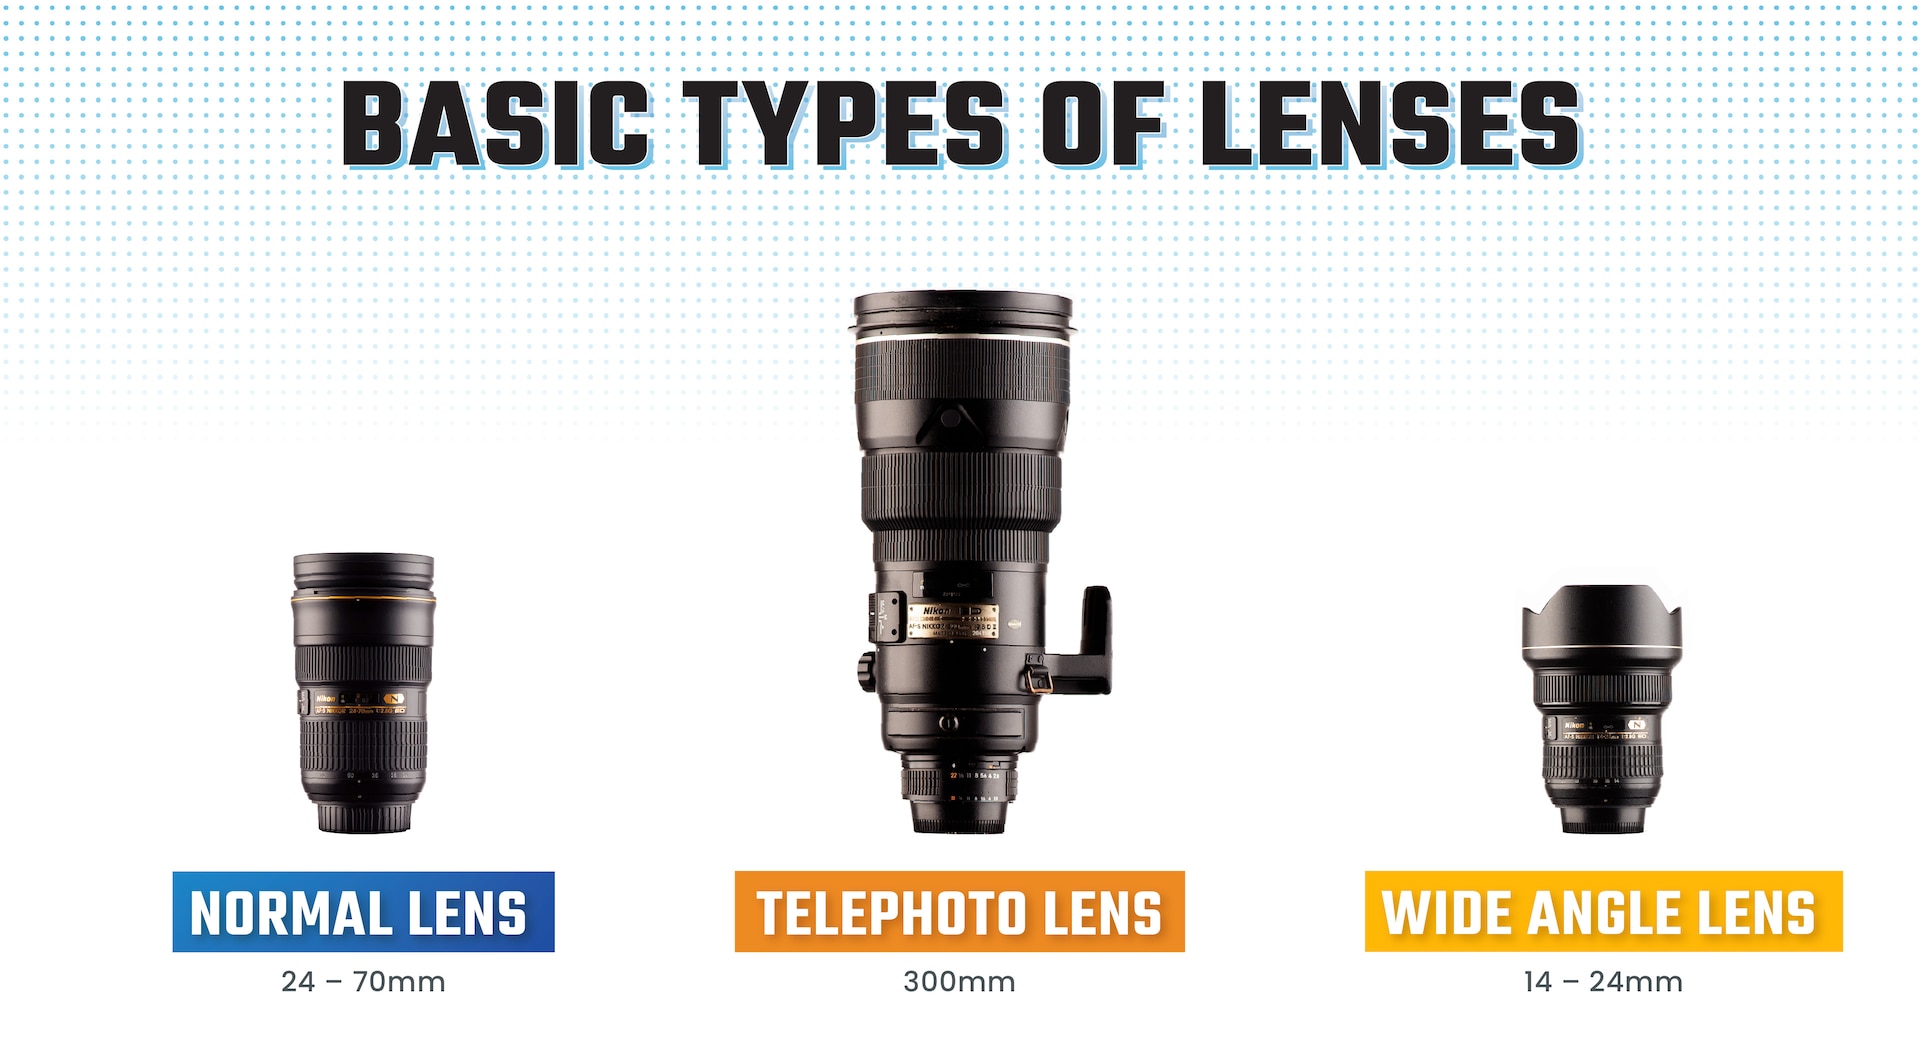 Image of three lenses and a lens focal length for each:  normal lens (24-70mm),  telephoto lens (300mm) and wide angle lens (14-24mm).